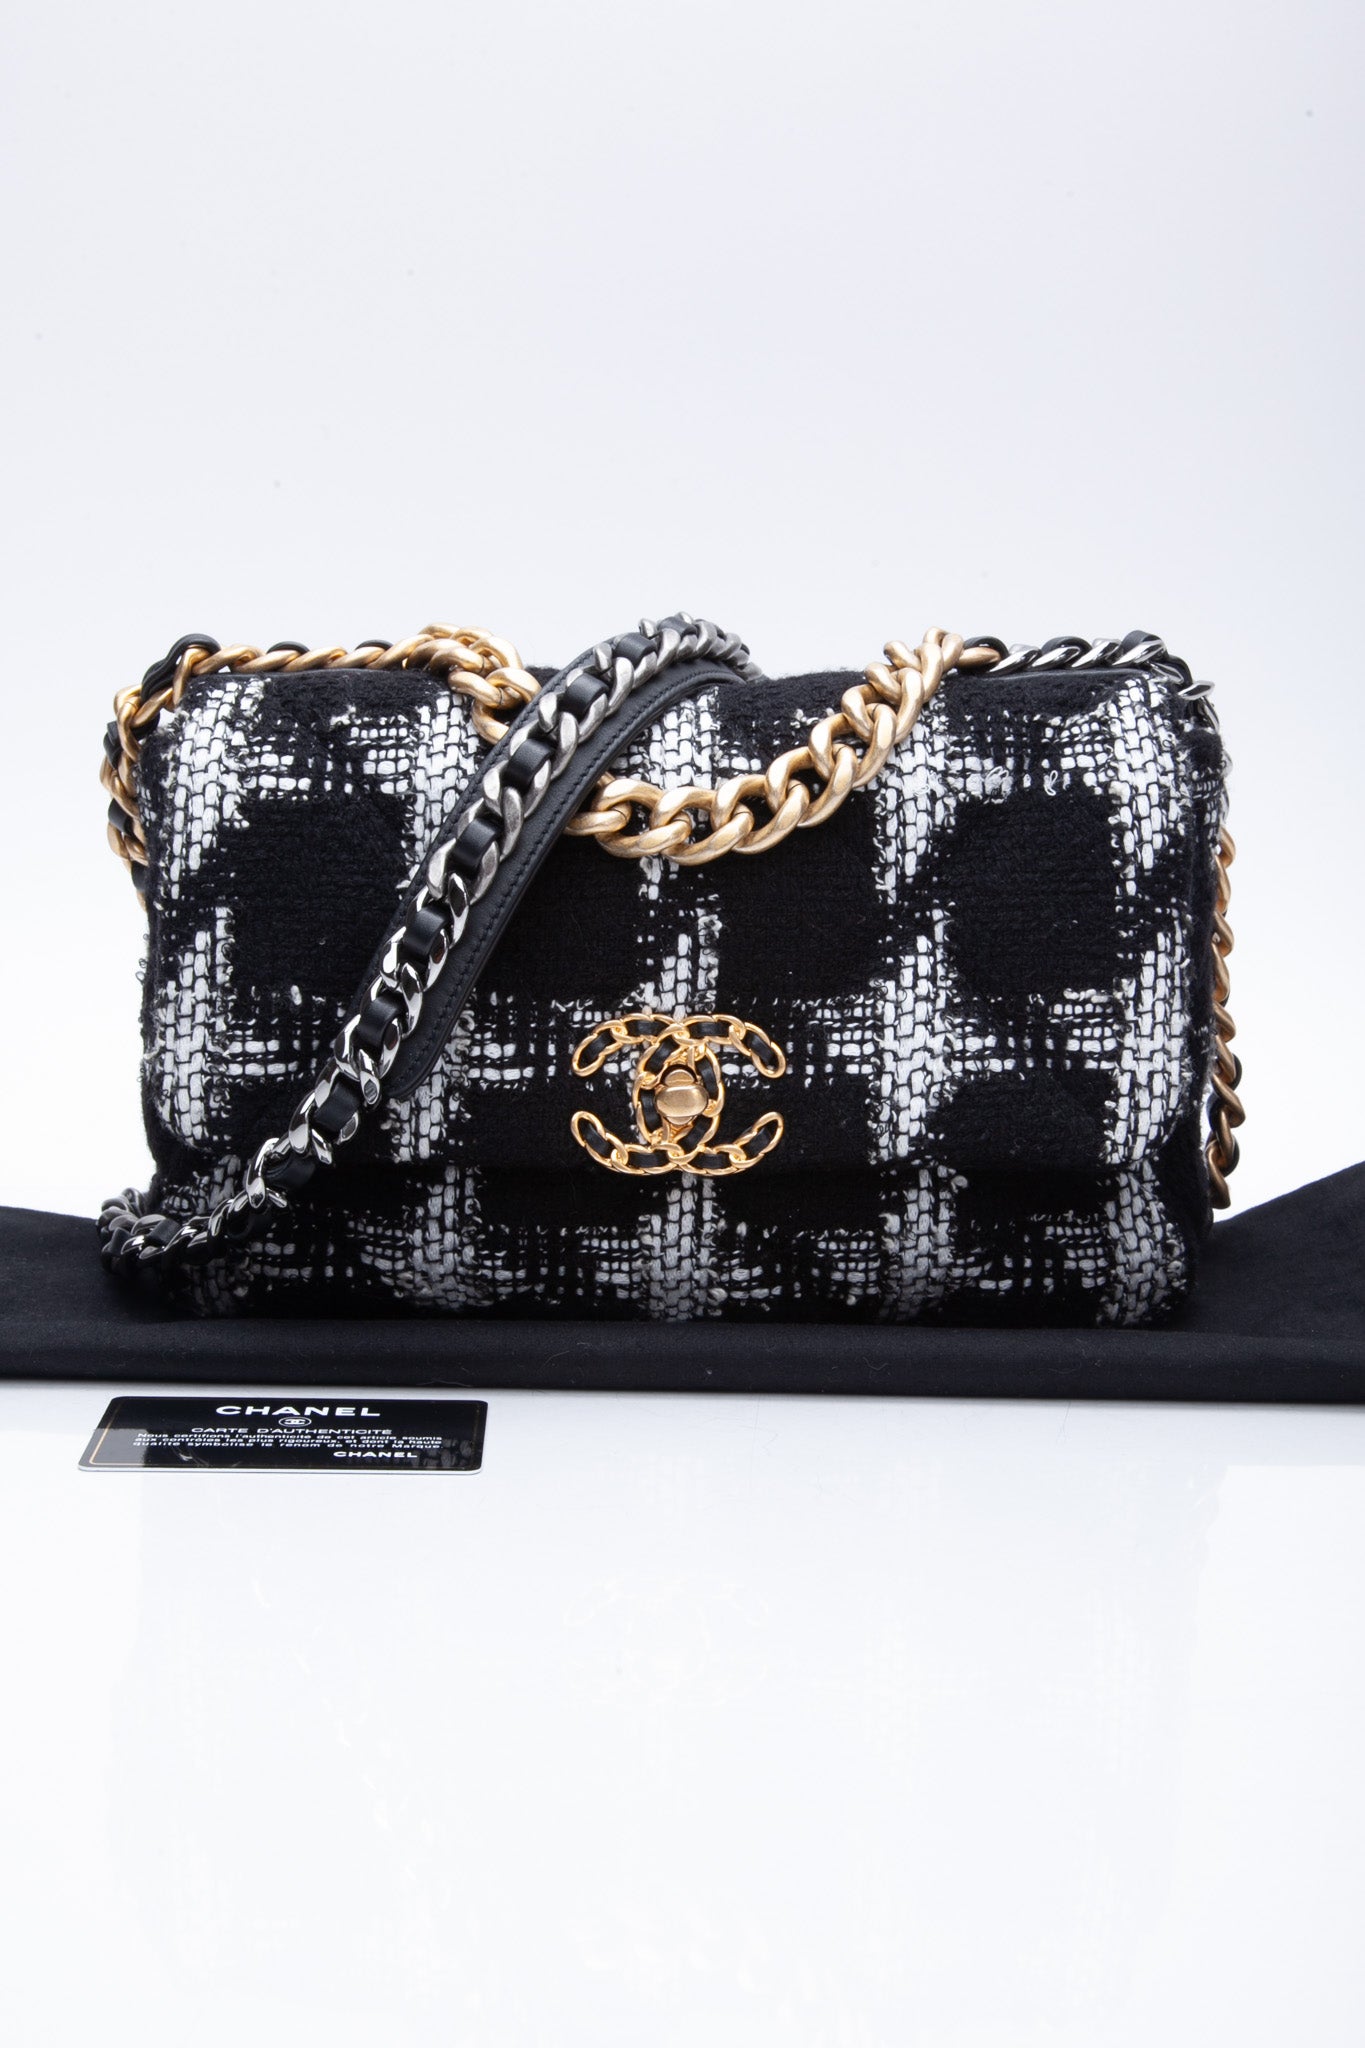 Chanel Black & White Tweed Quilted Medium Chanel 19 Flap ref